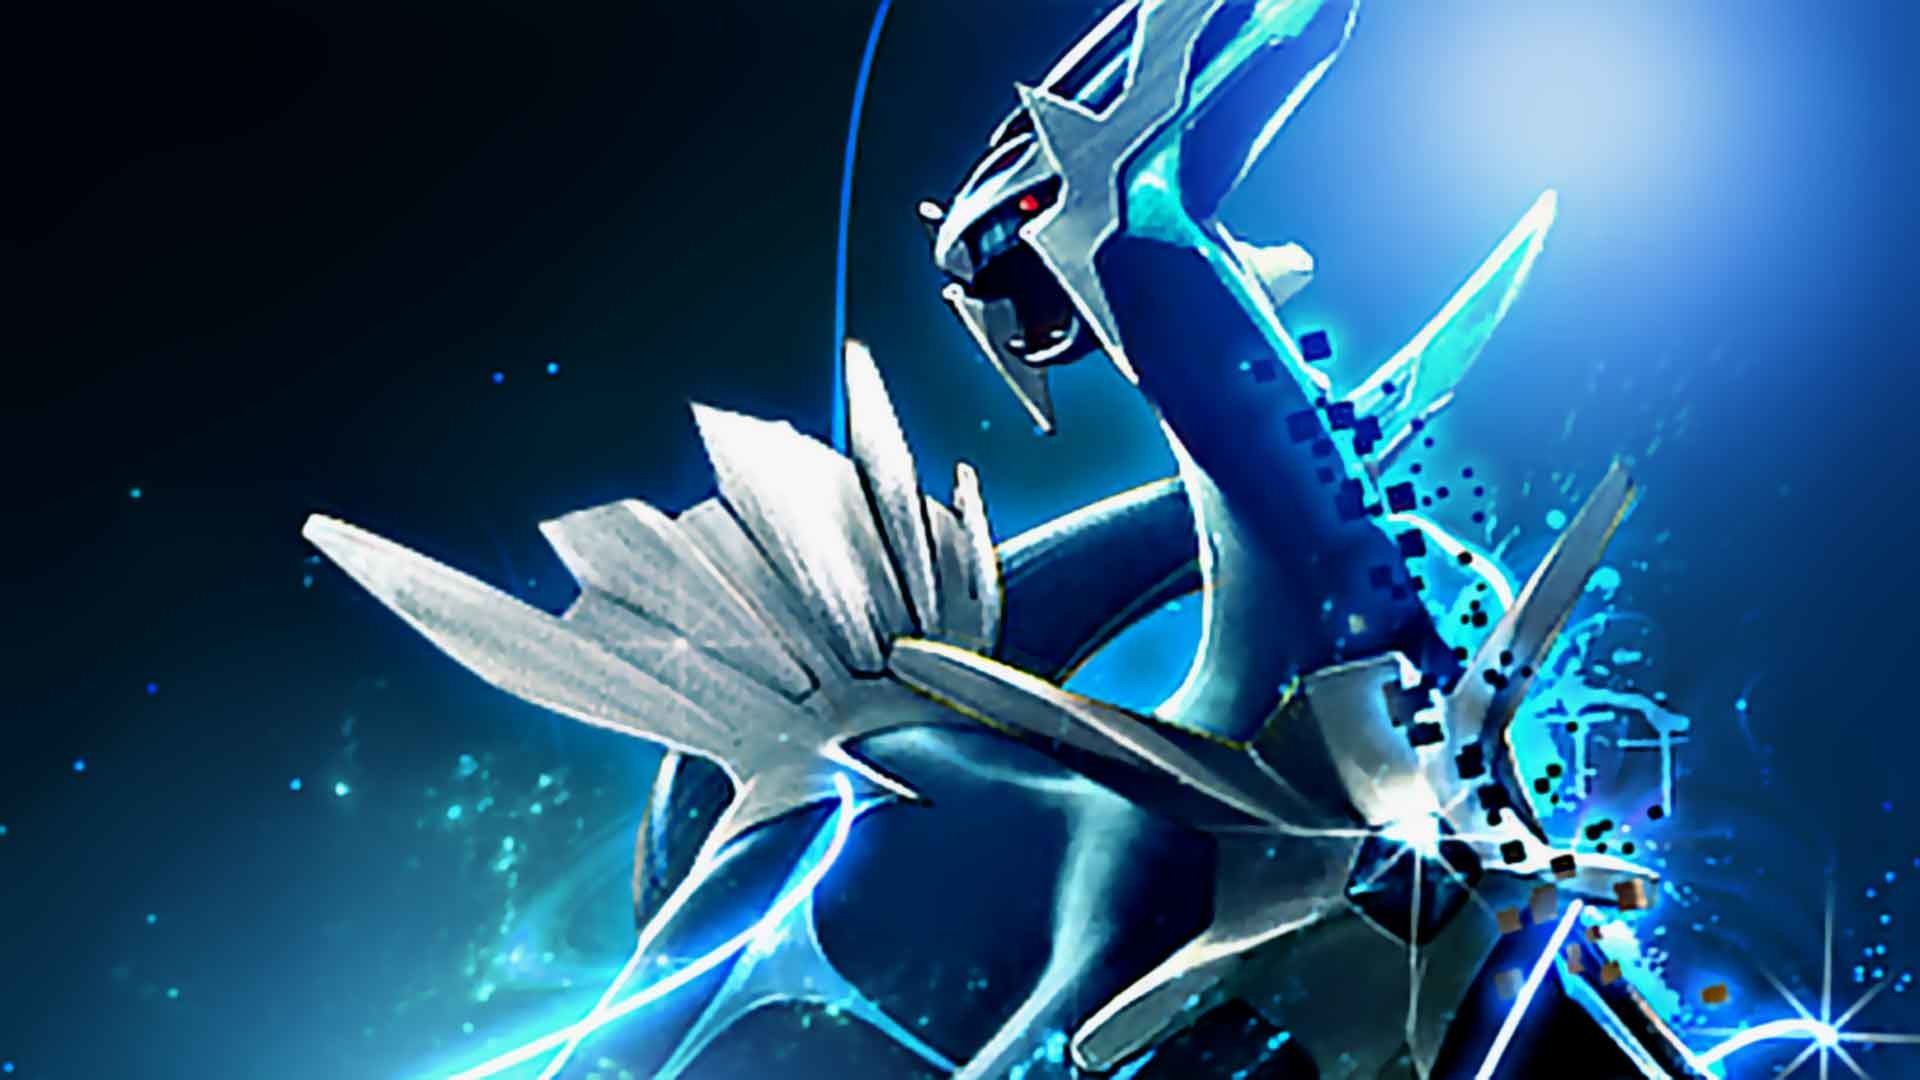 1920x1080 0 Dragon Type Pokemon images Rayquaza,Groudon amp kyogre HD wallpaper  Kyogre Wallpapers